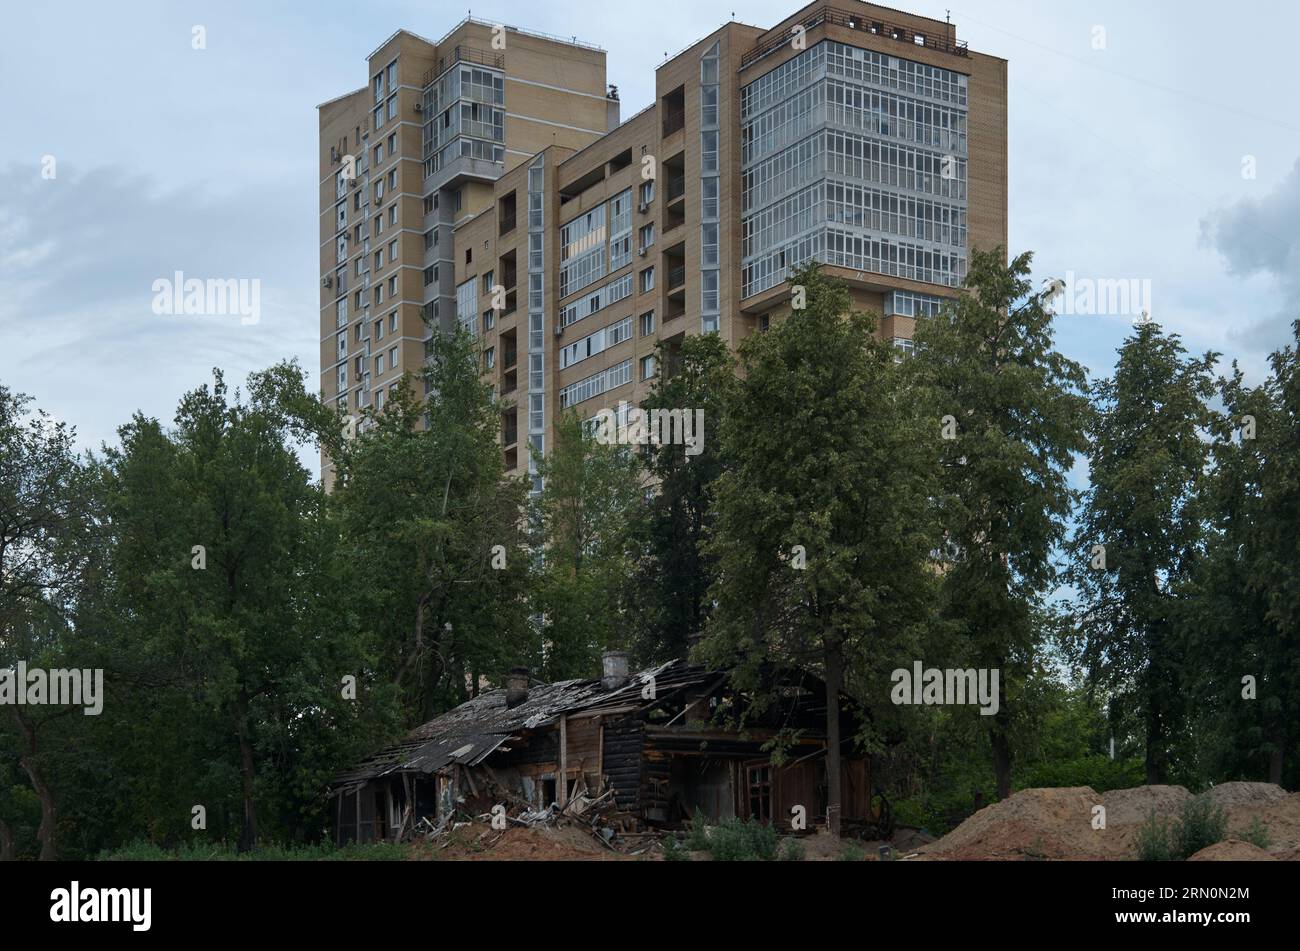 The ruins of an old house against the backdrop of a modern brick high-rise building Stock Photo